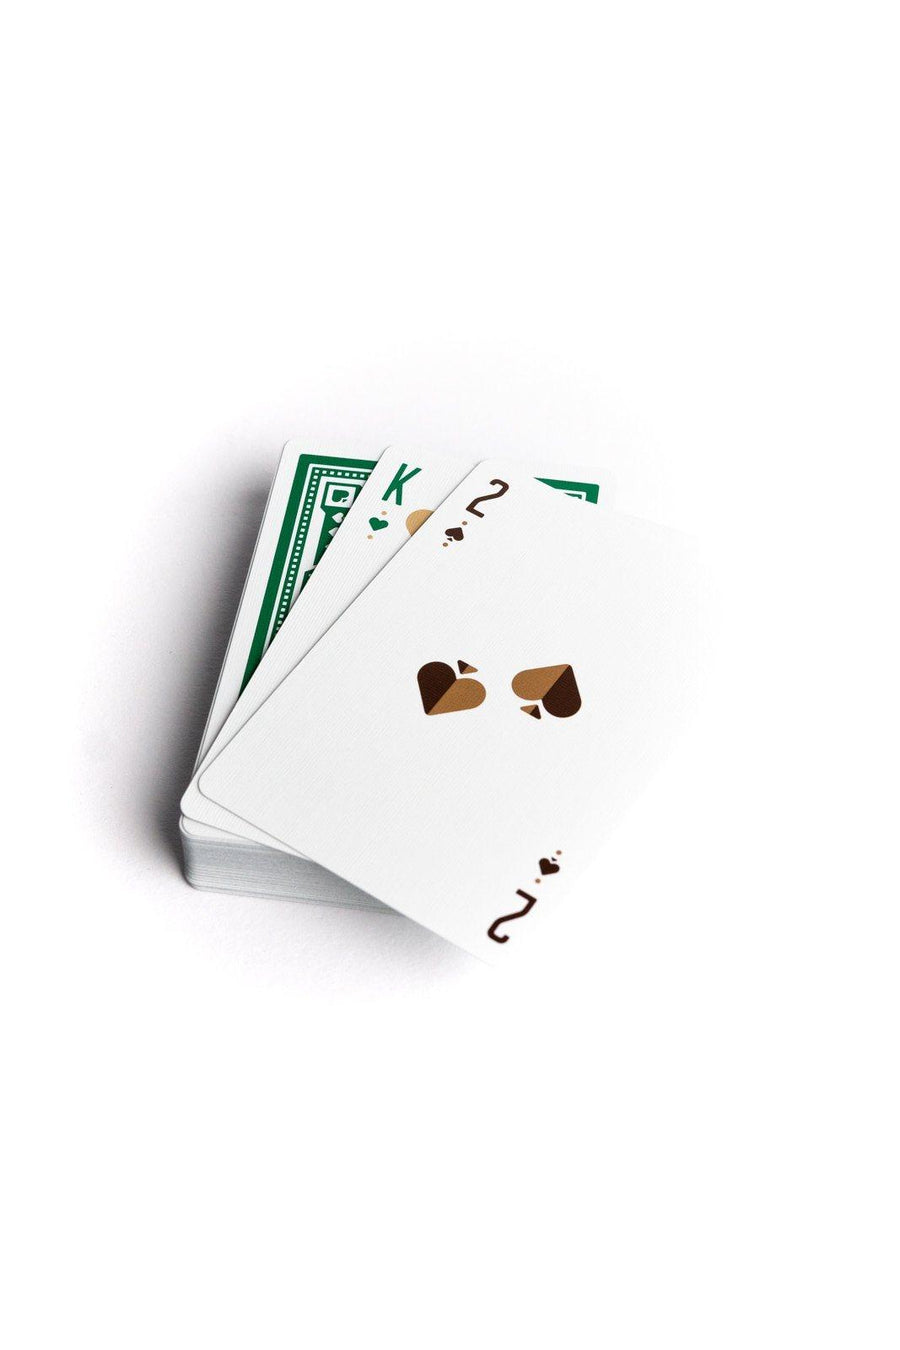 Green Wheel Limited Edition Playing Cards by Art of Play